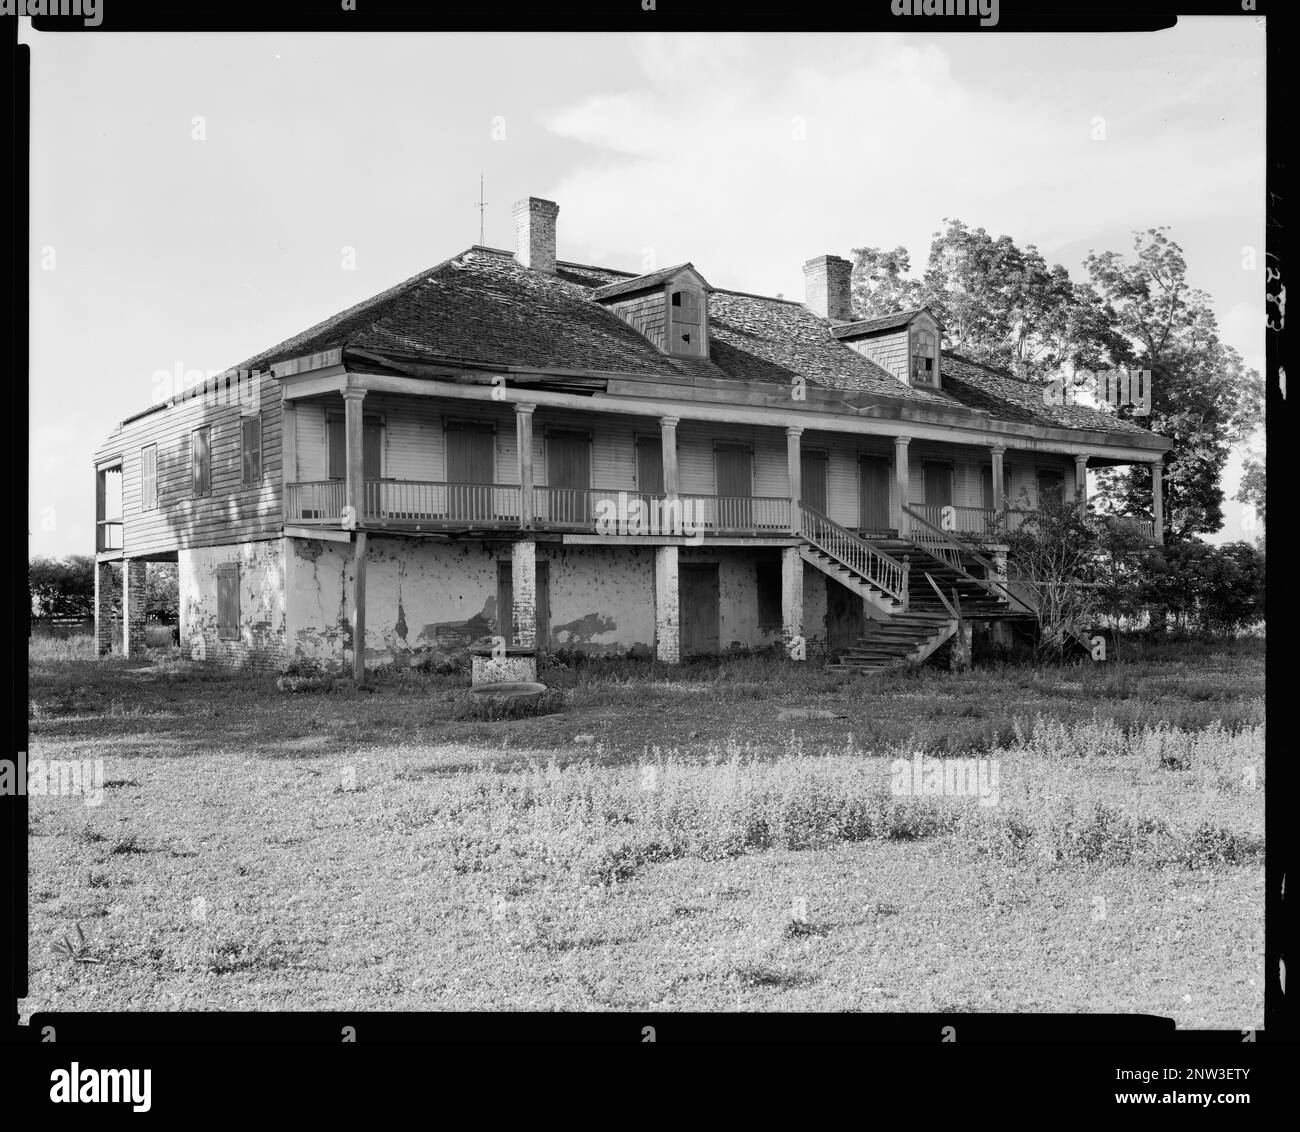 Montague or Montagut Plantation, Reserve, St. John the Baptist Parish, Louisiana. Carnegie Survey of the Architecture of the South. United States, Louisiana, St. John the Baptist Parish, Reserve,  Abandoned buildings,  Balconies,  Dormers,  Hand railings,  Hip roofs,  Houses,  Stairways. Stock Photo